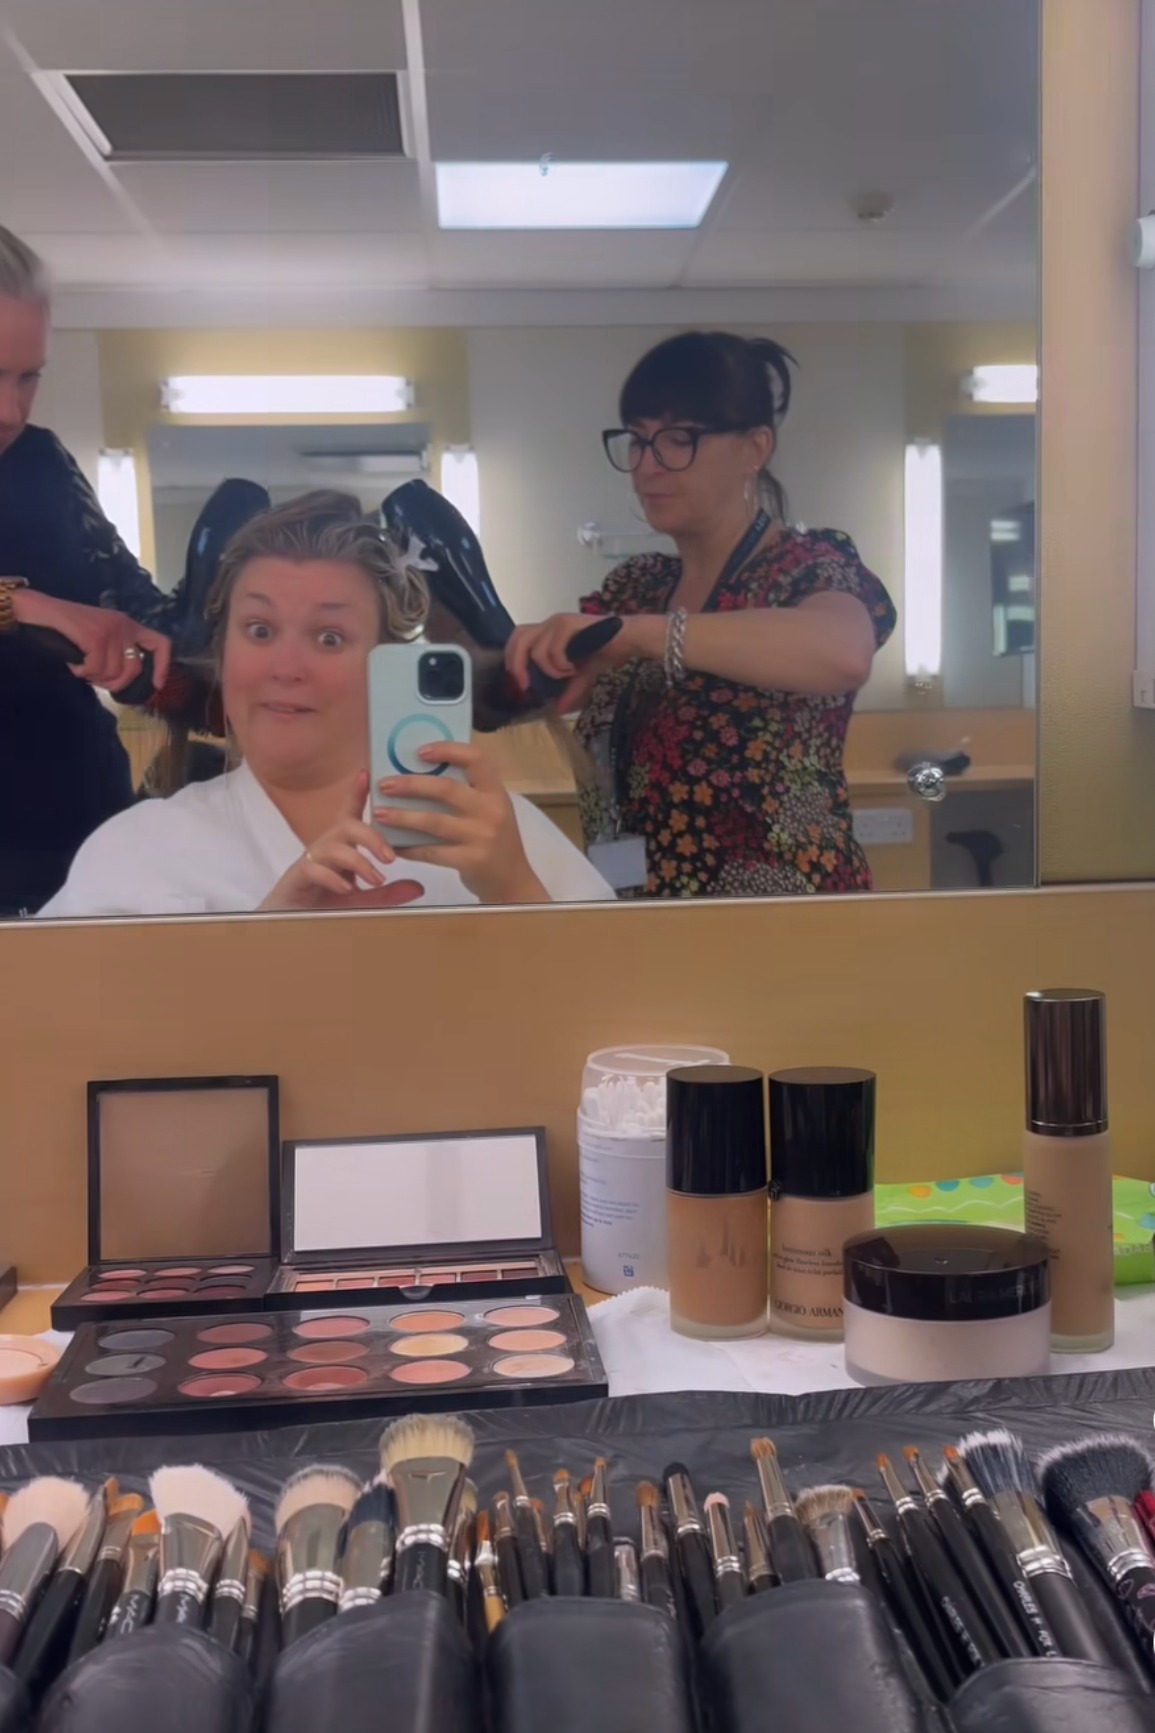 Dragons’ Den star Sara Davies shrieks in panic as ‘hairs falls out’ in chaotic makeover video